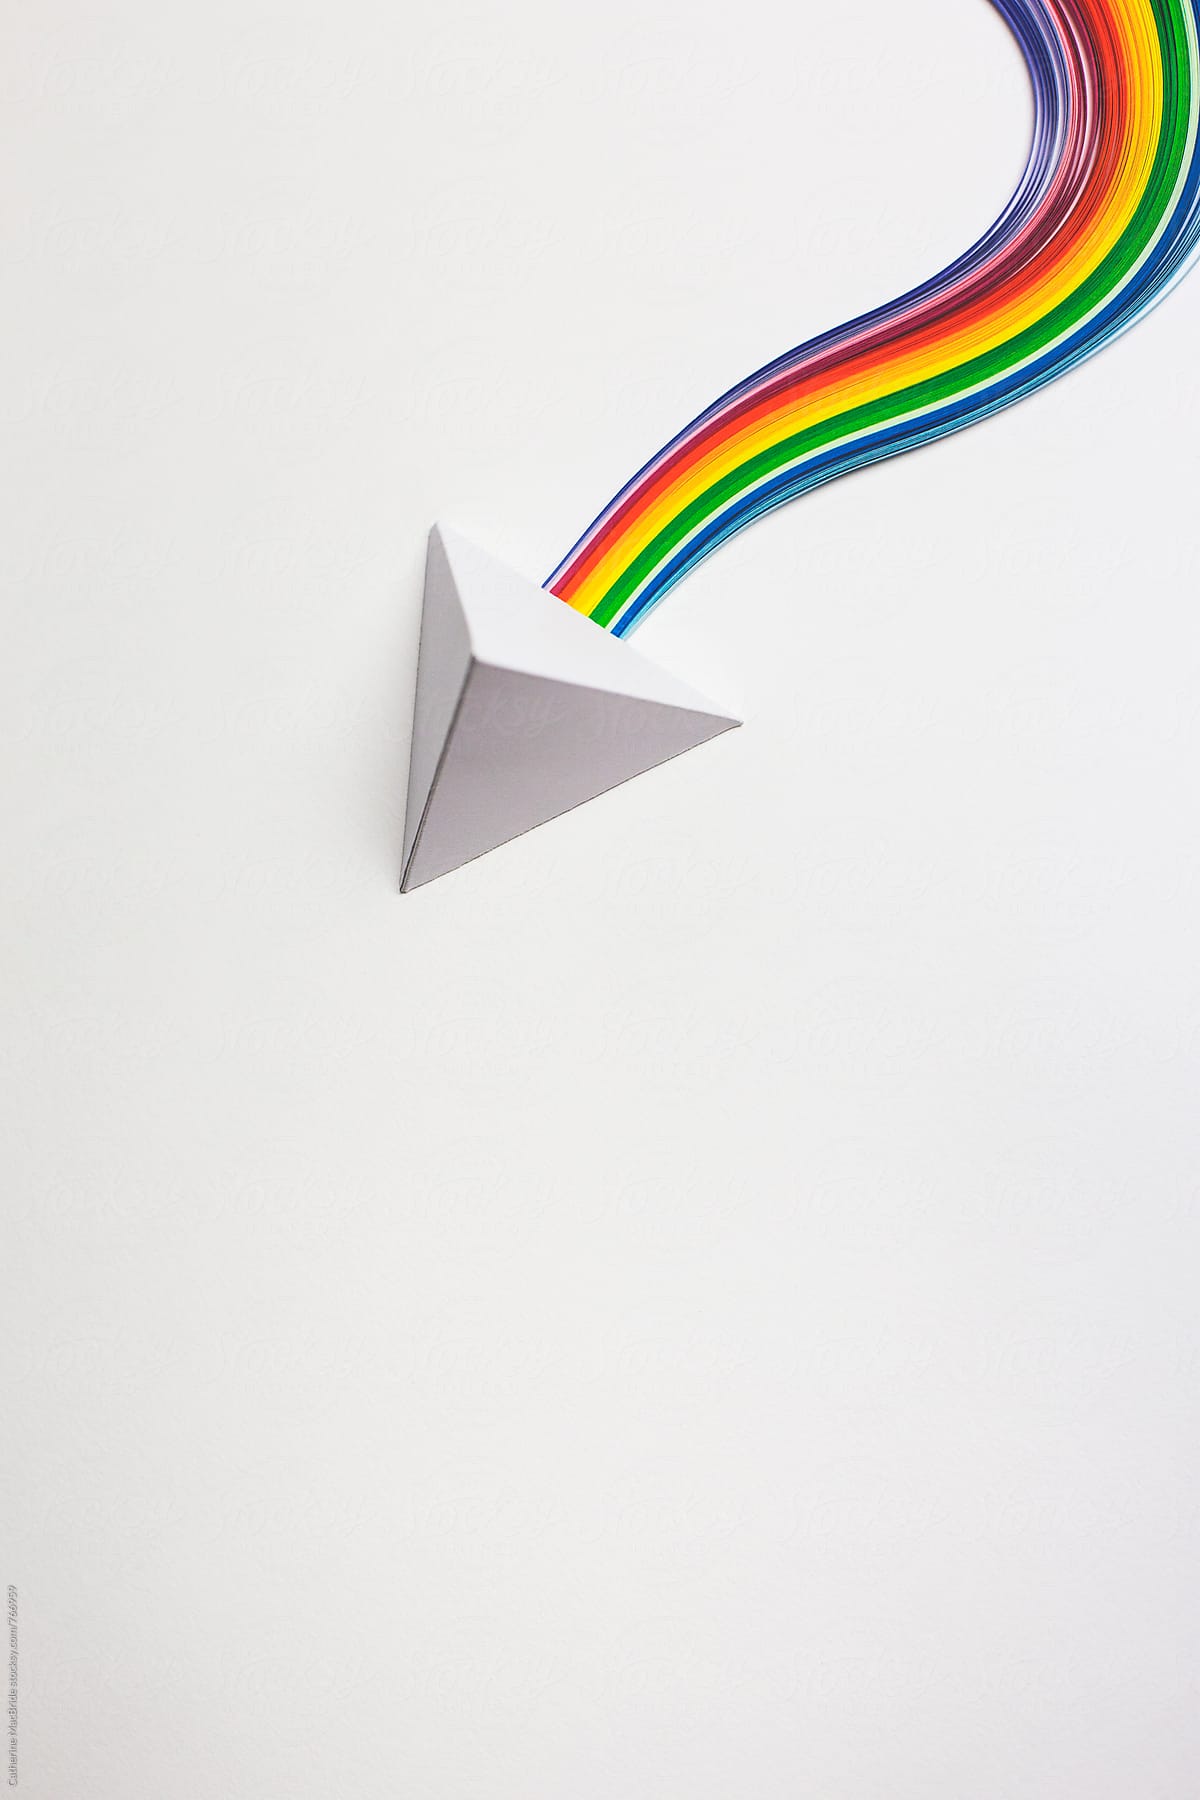 Paper Prism and Paper Rainbow...